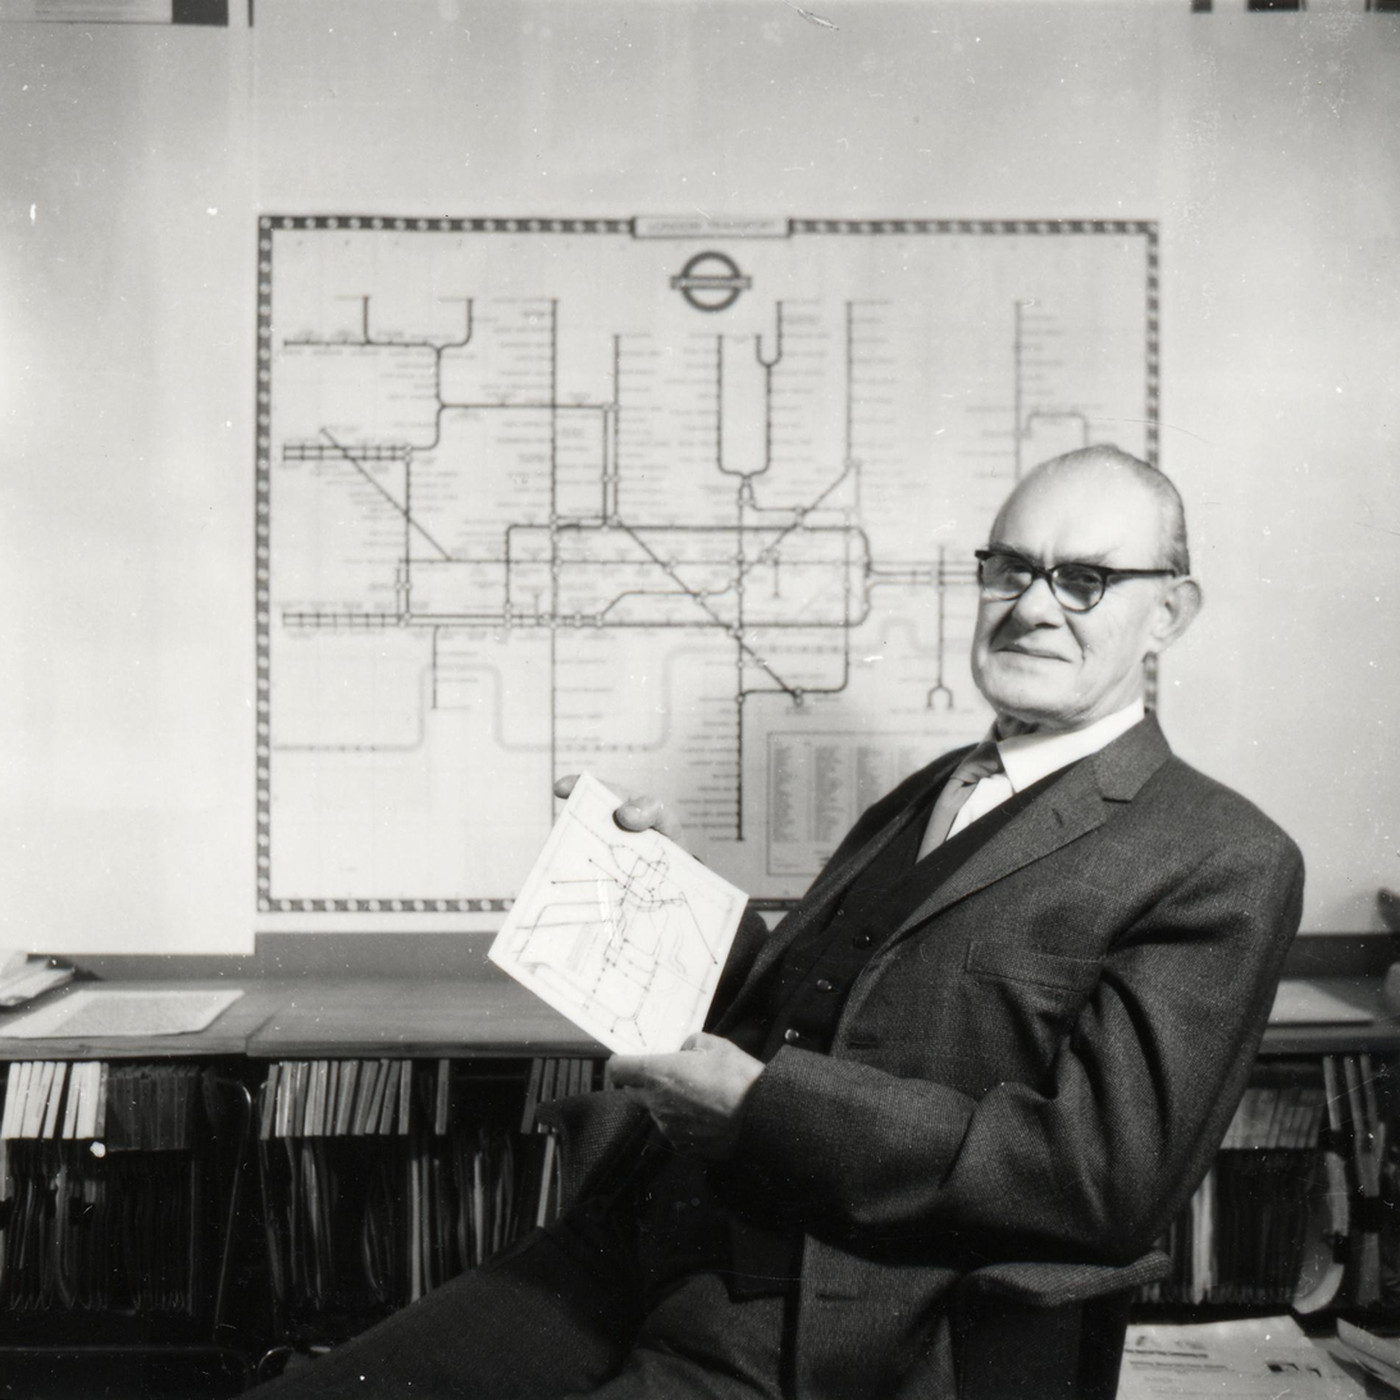 Meet Harry Beck, the genius behind London's iconic subway map - The Verge